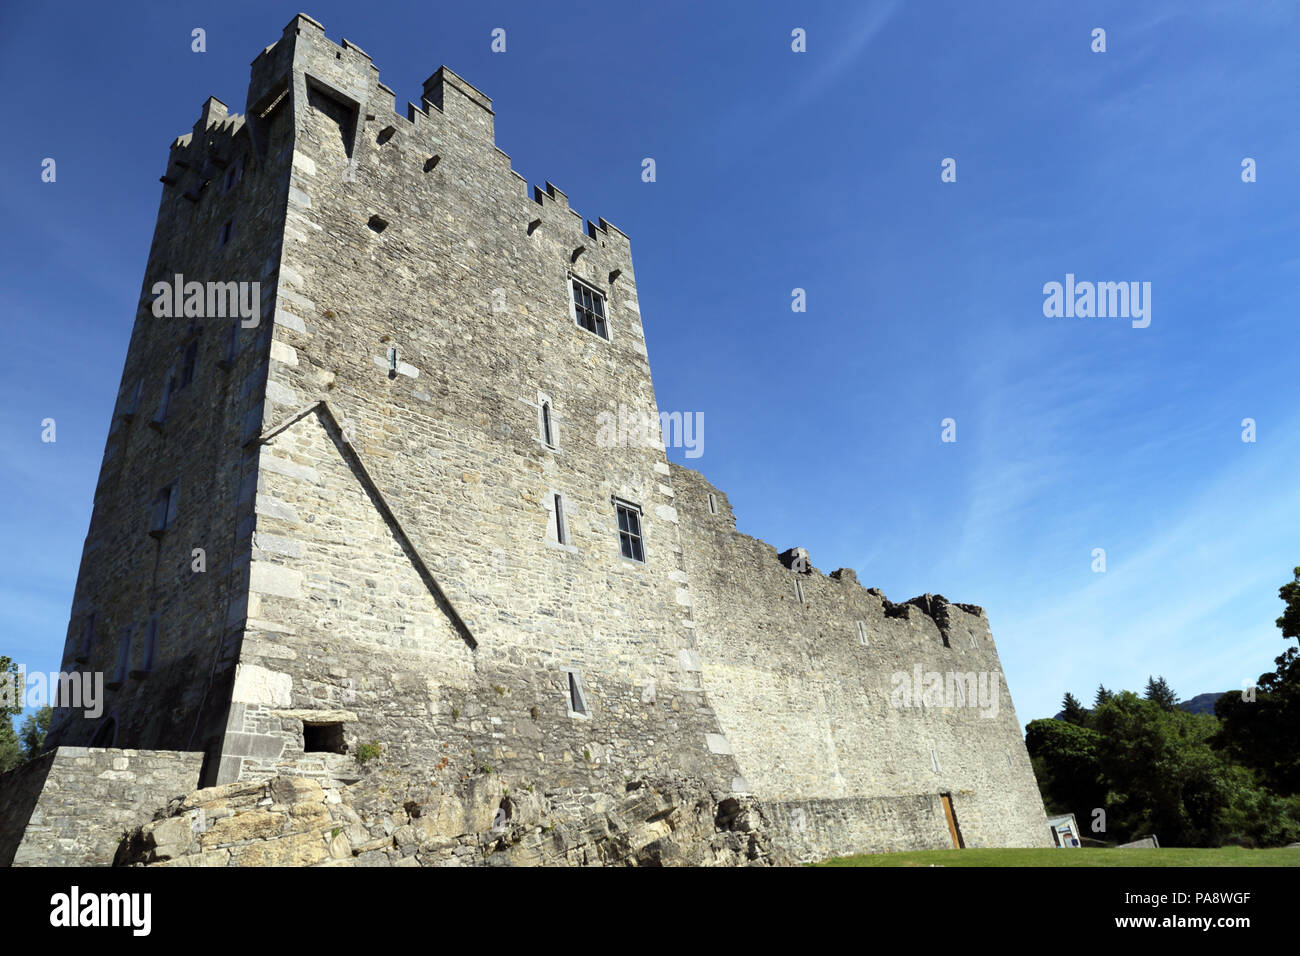 Ross Castle is a 15th-century tower house and keep on the edge of Lough Leane, in Killarney National Park, County Kerry, Ireland. Stock Photo